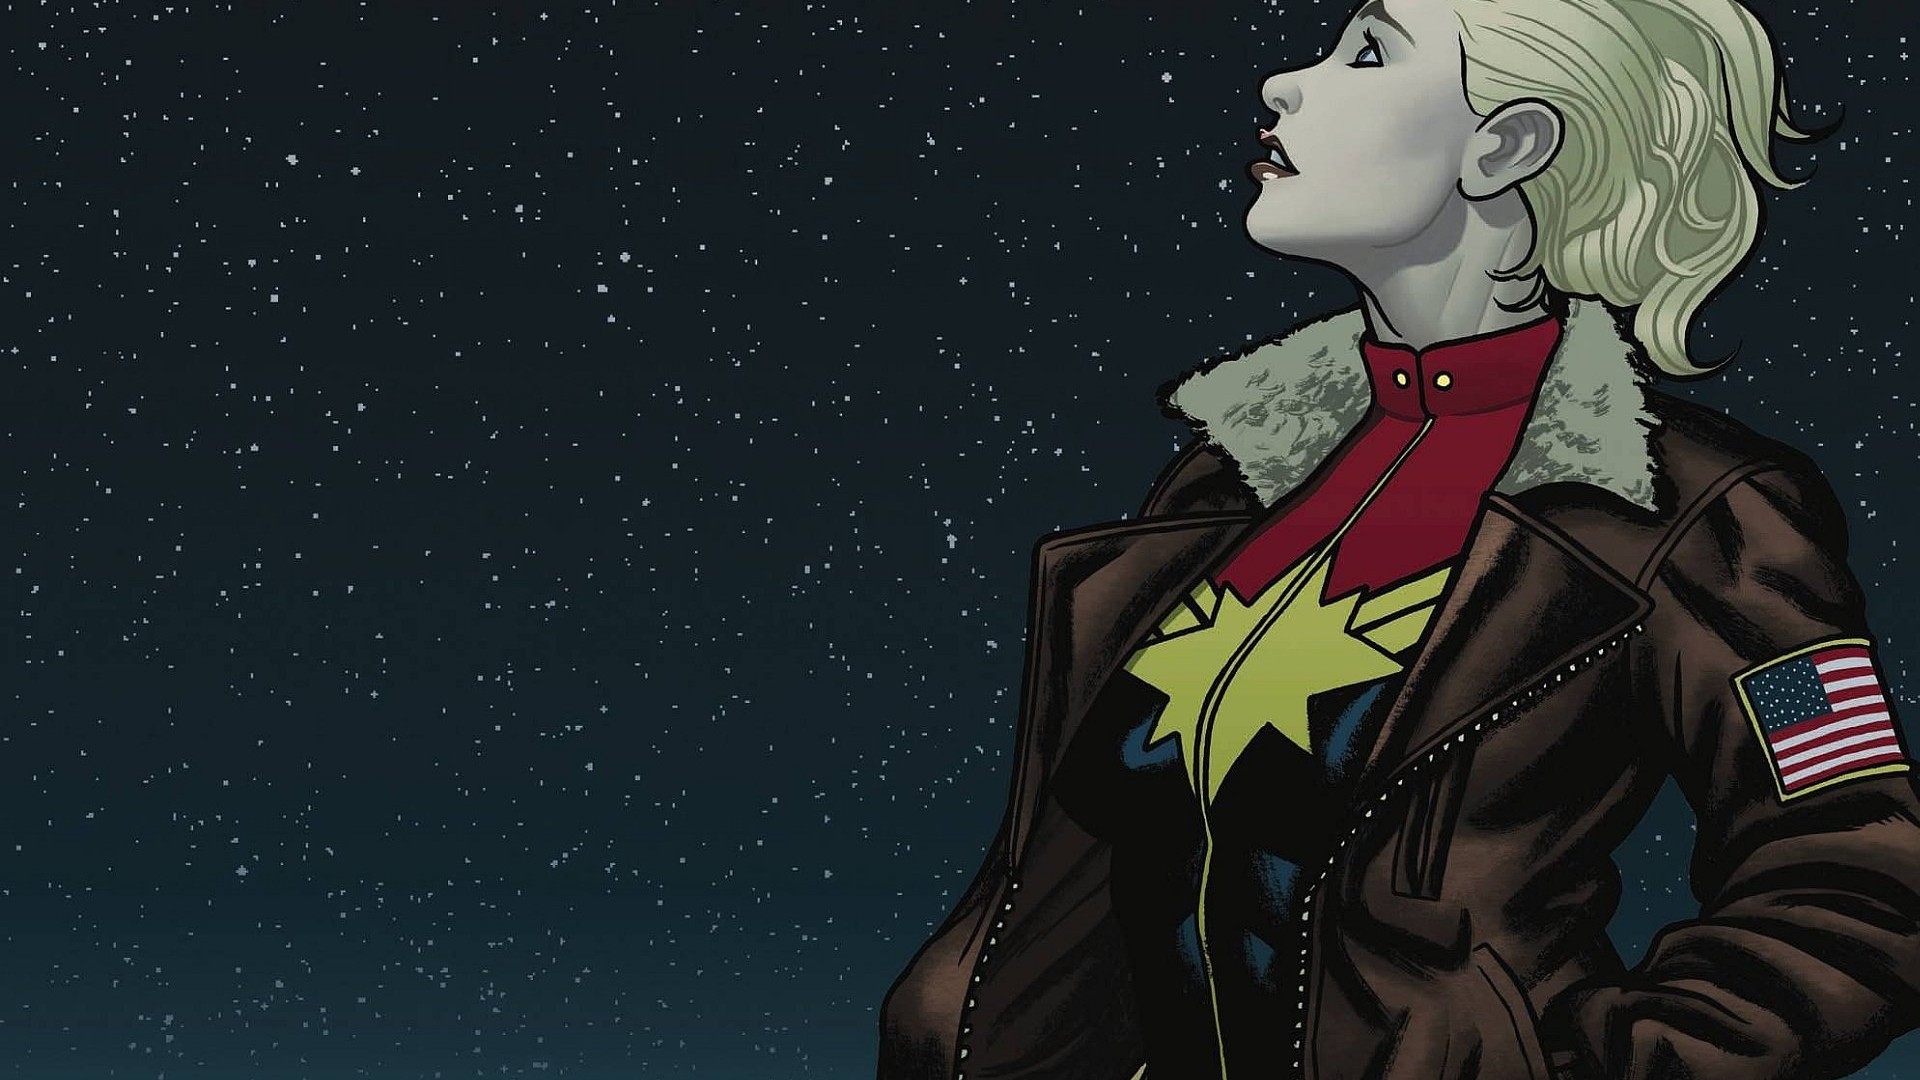 Wallpaper HD Captain Marvel Animated with high-resolution 1920x1080 pixel. You can use this wallpaper for your Desktop Computer Backgrounds, Mac Wallpapers, Android Lock screen or iPhone Screensavers and another smartphone device